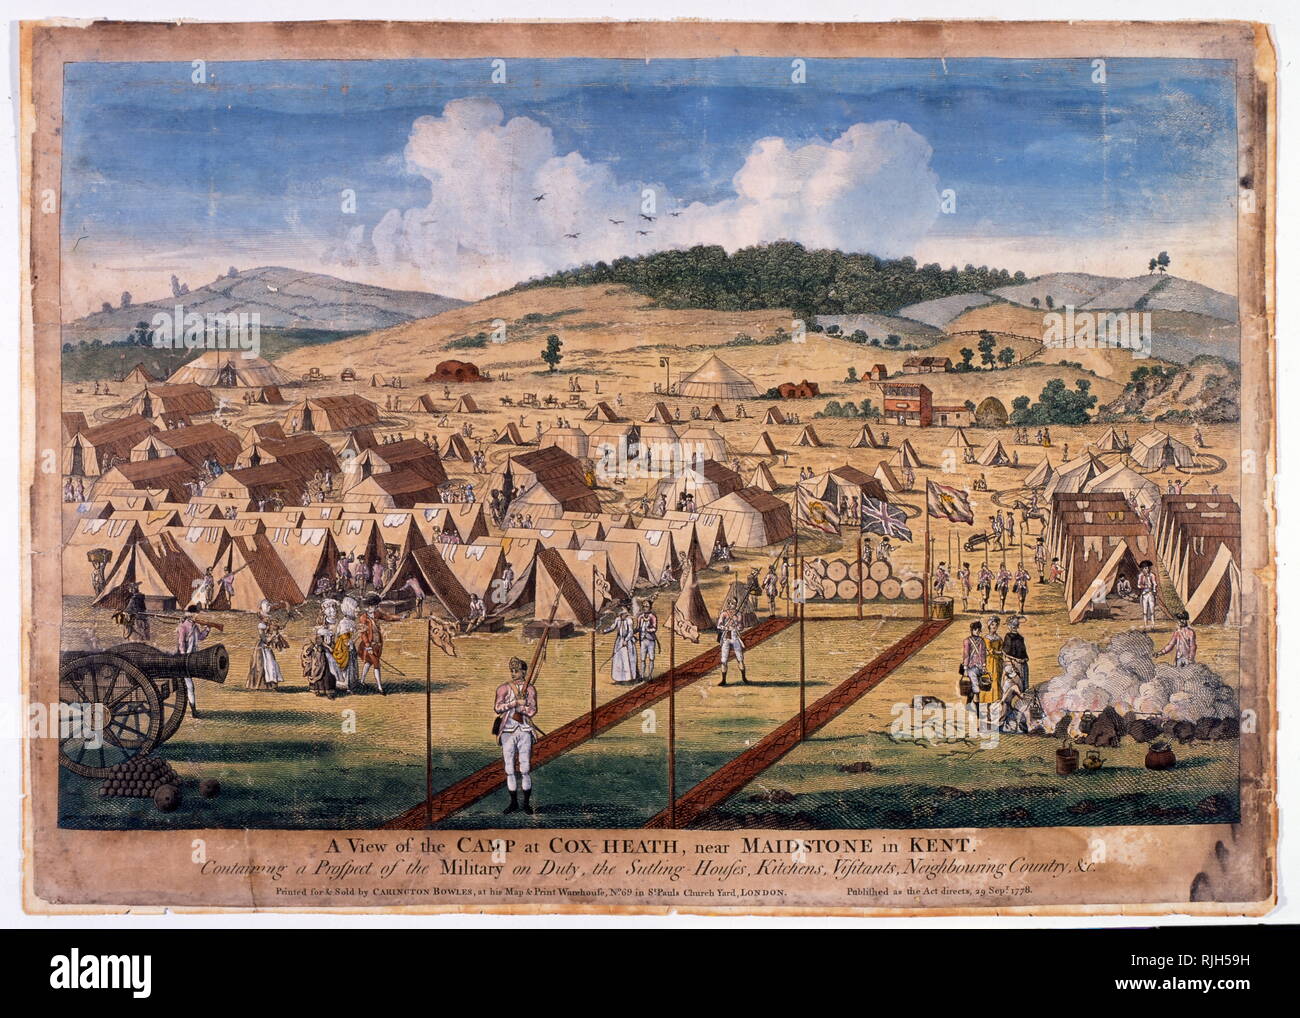 18th century print showing, a view of the British military camp at cox heath, near Maidstone, in Kent. 1778 Stock Photo